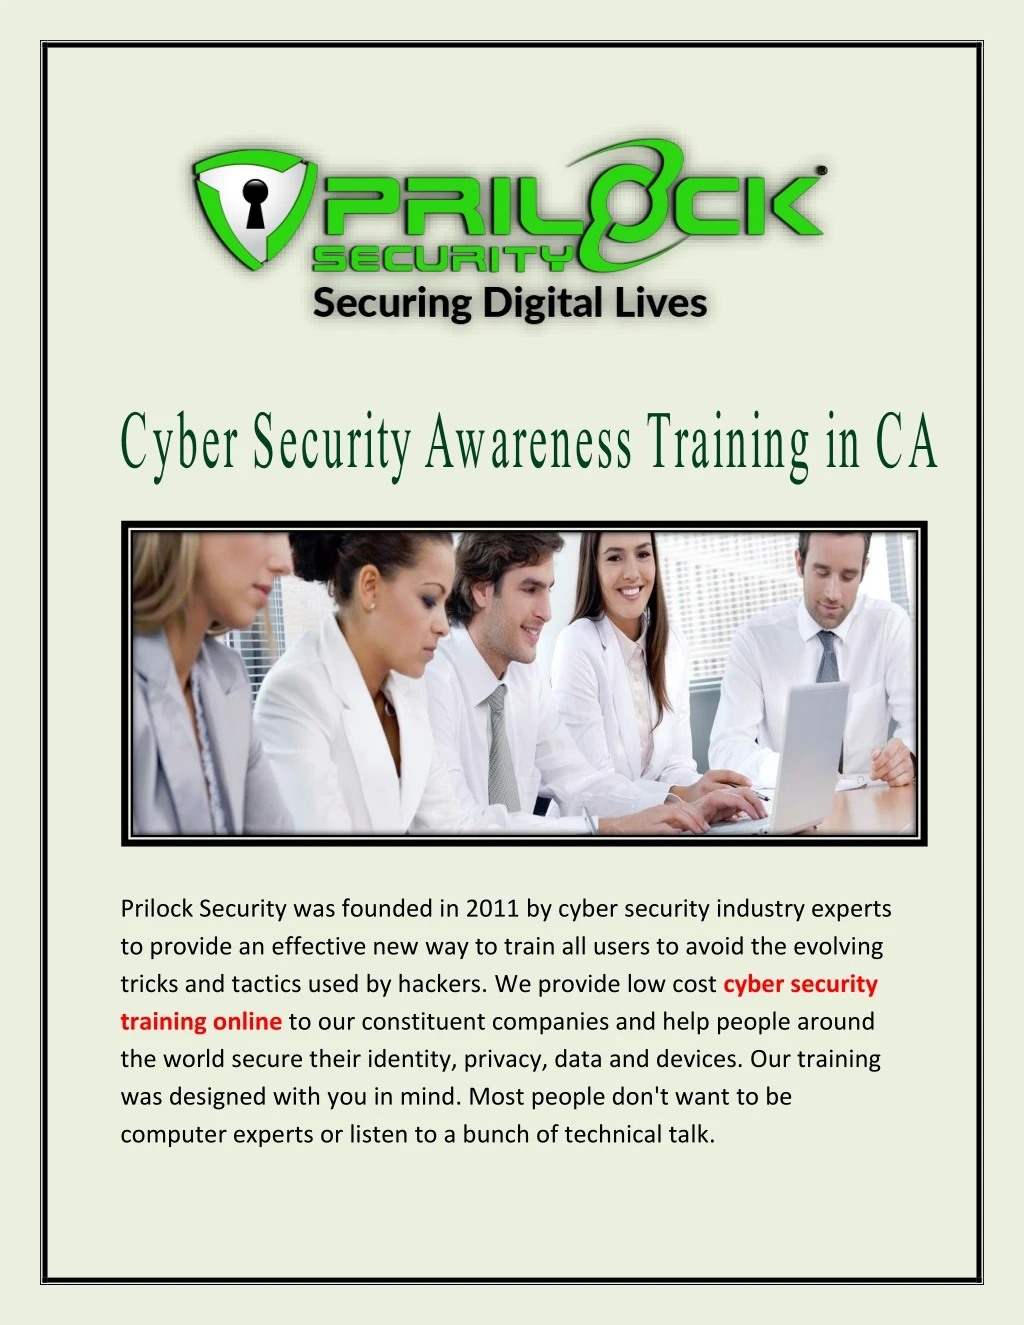 prilock security was founded in 2011 by cyber